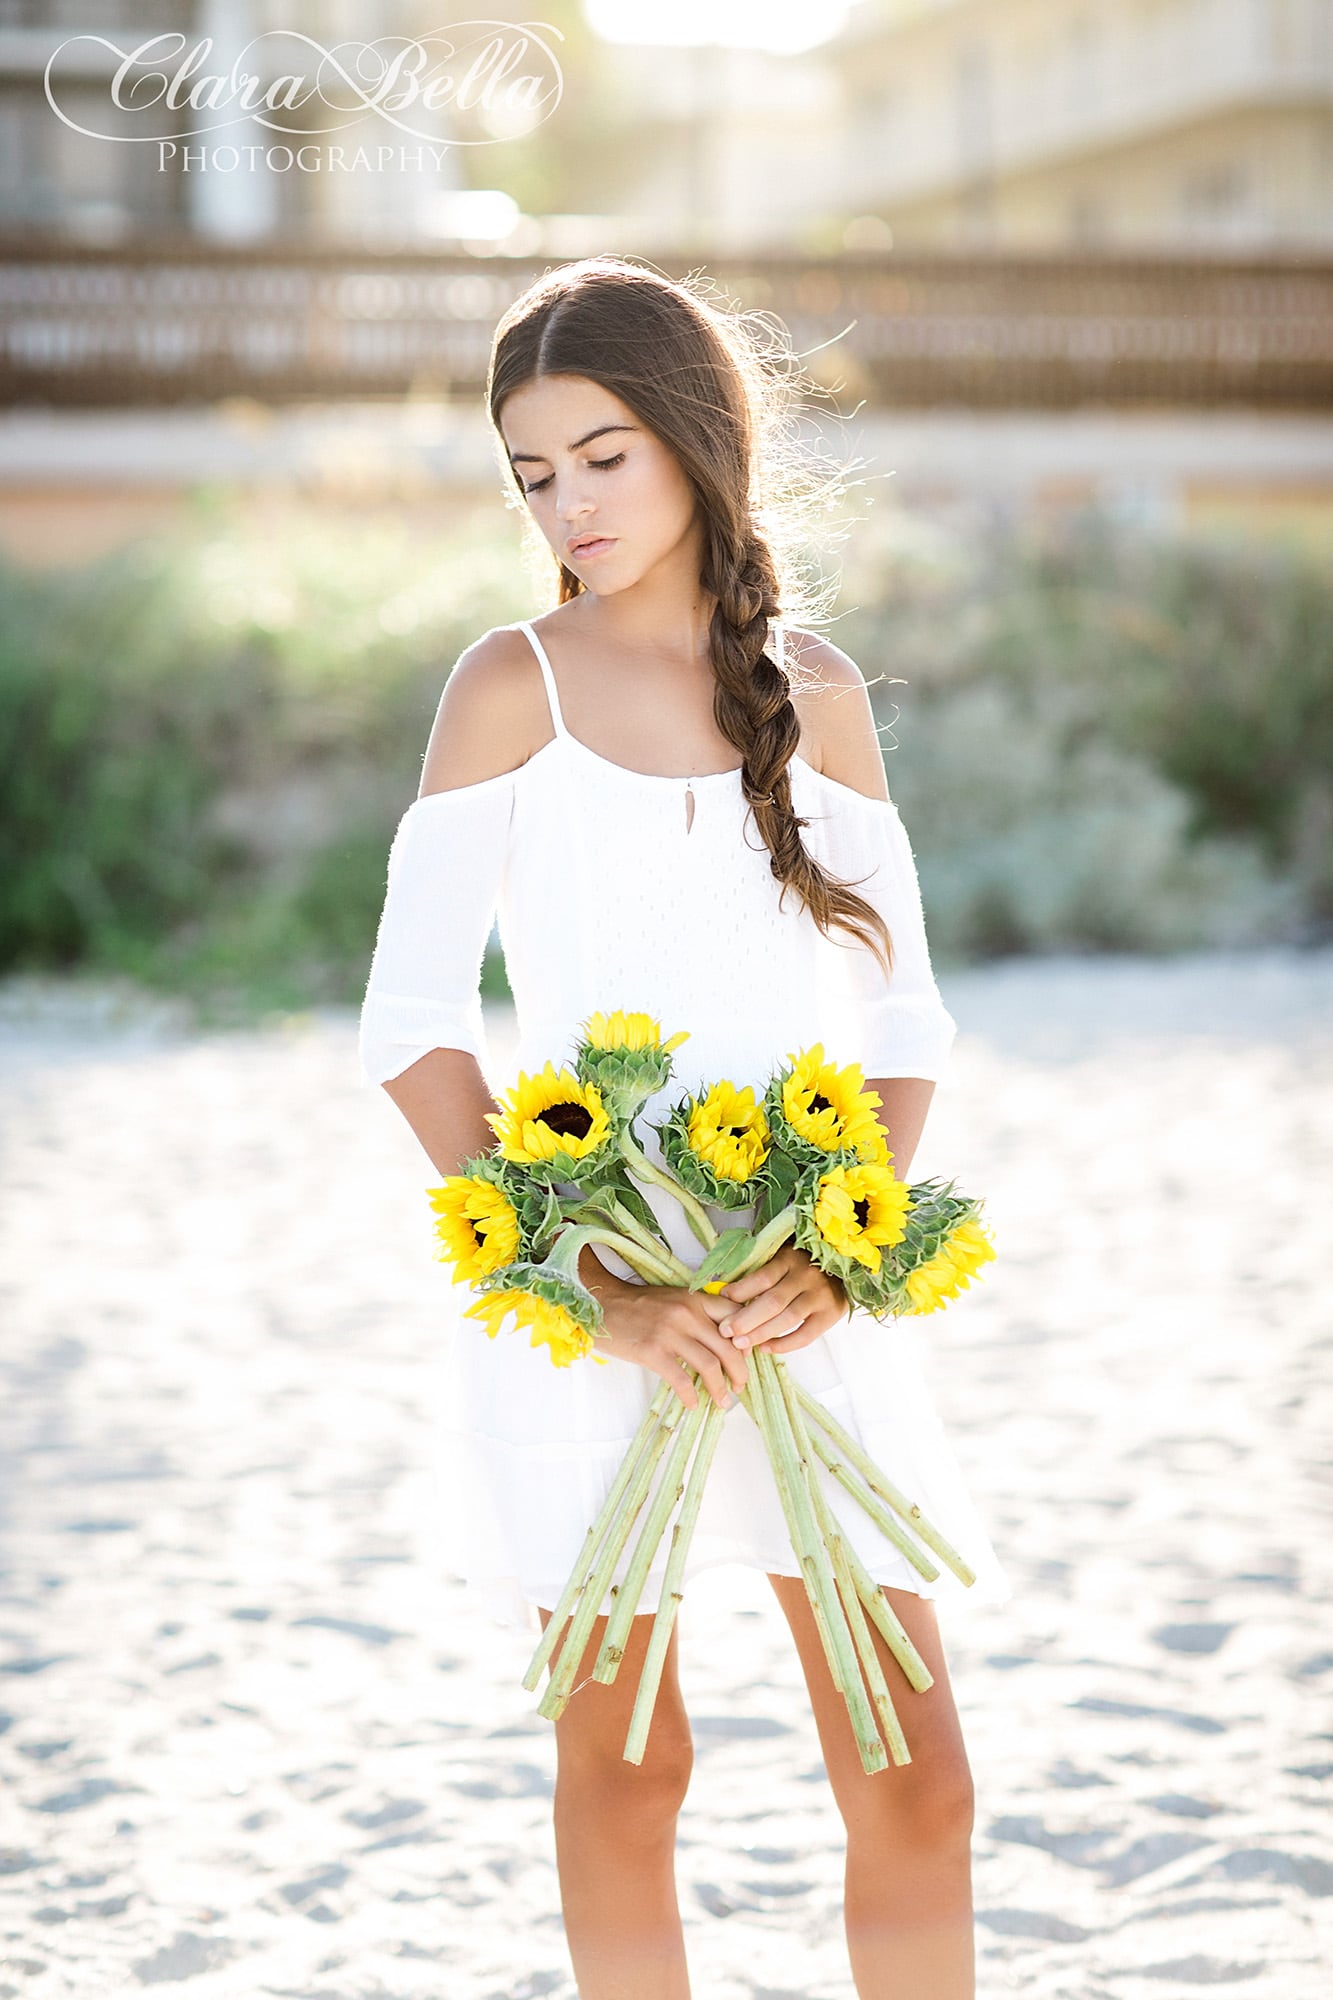 Sophie {Palm Beach Florida Photographer} Clara Bella Photography by Claire Anderson